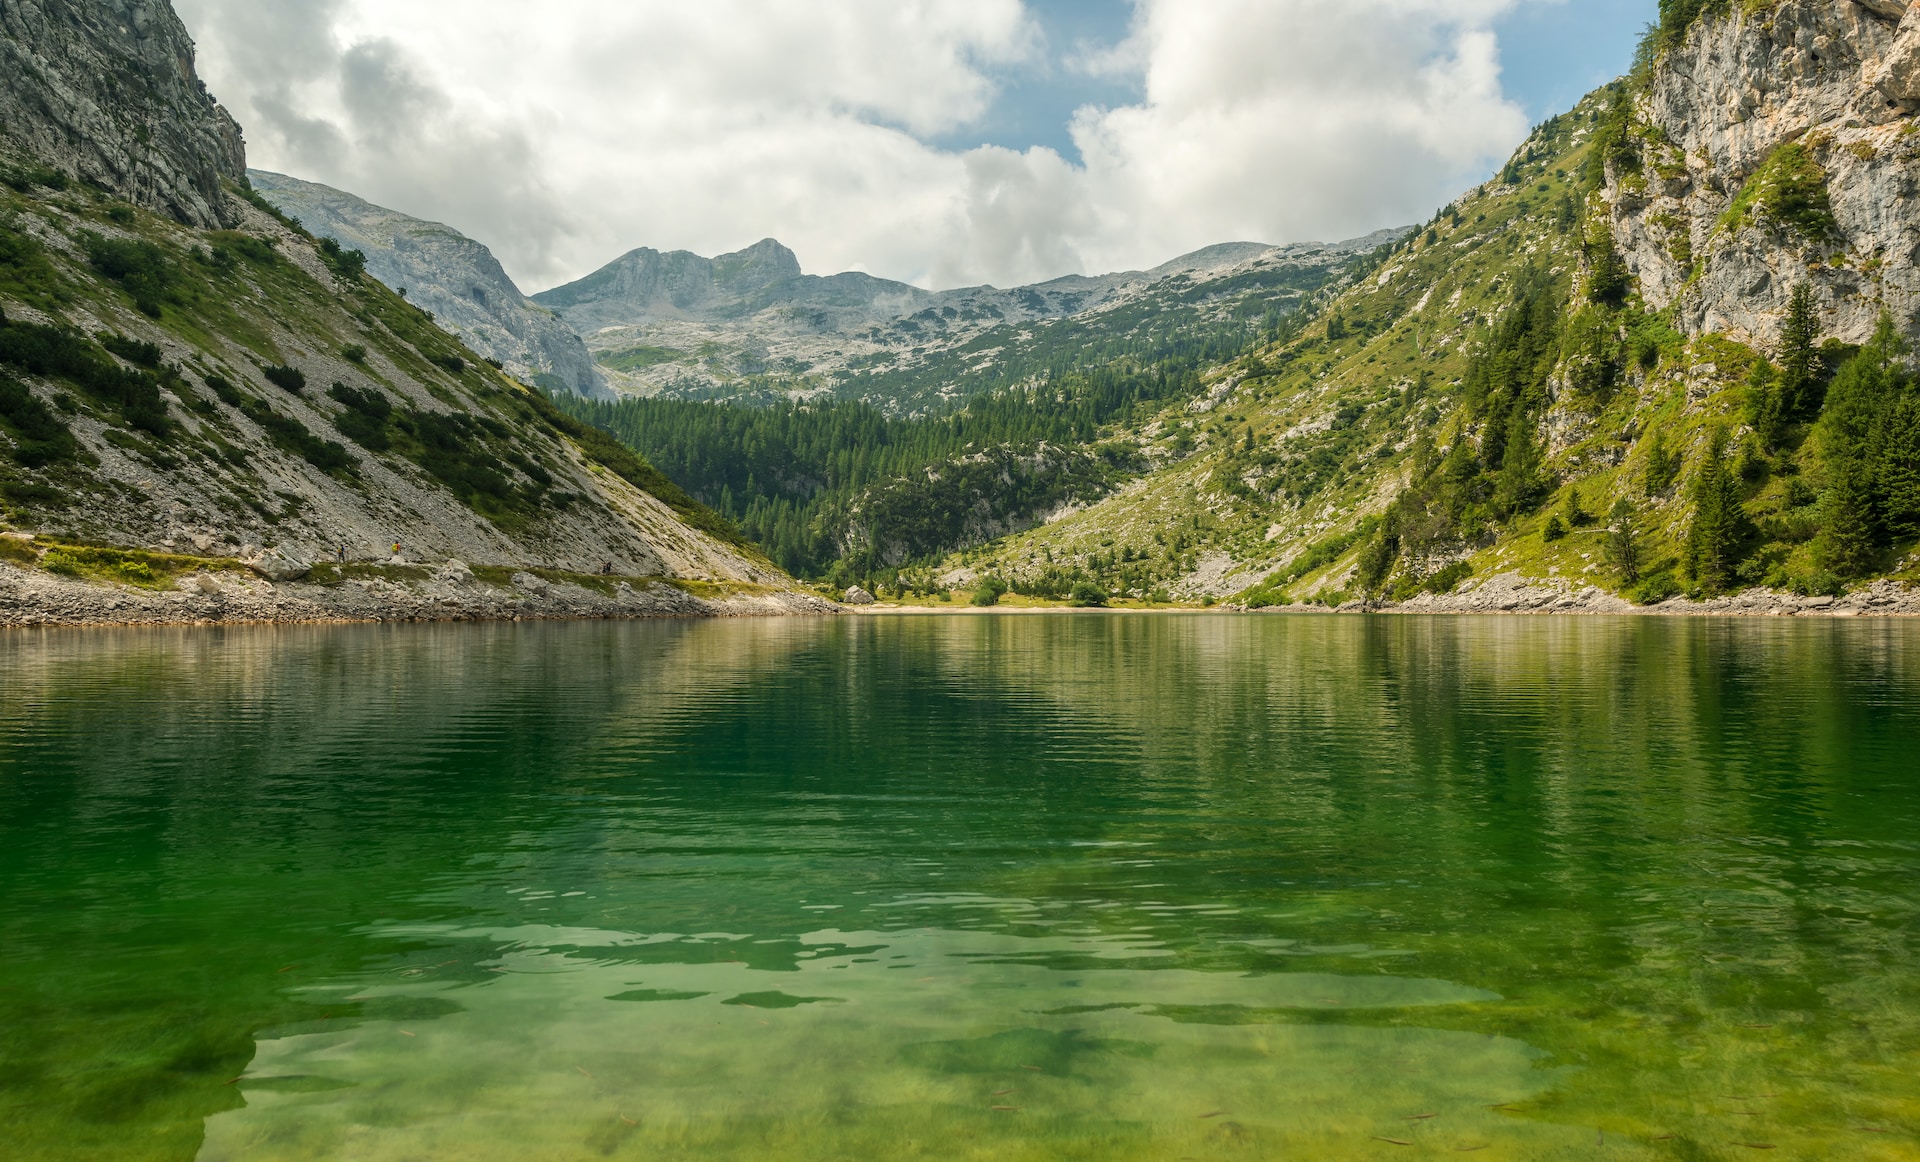 image of a green lake with mountains in the background | B2B IT-Partner